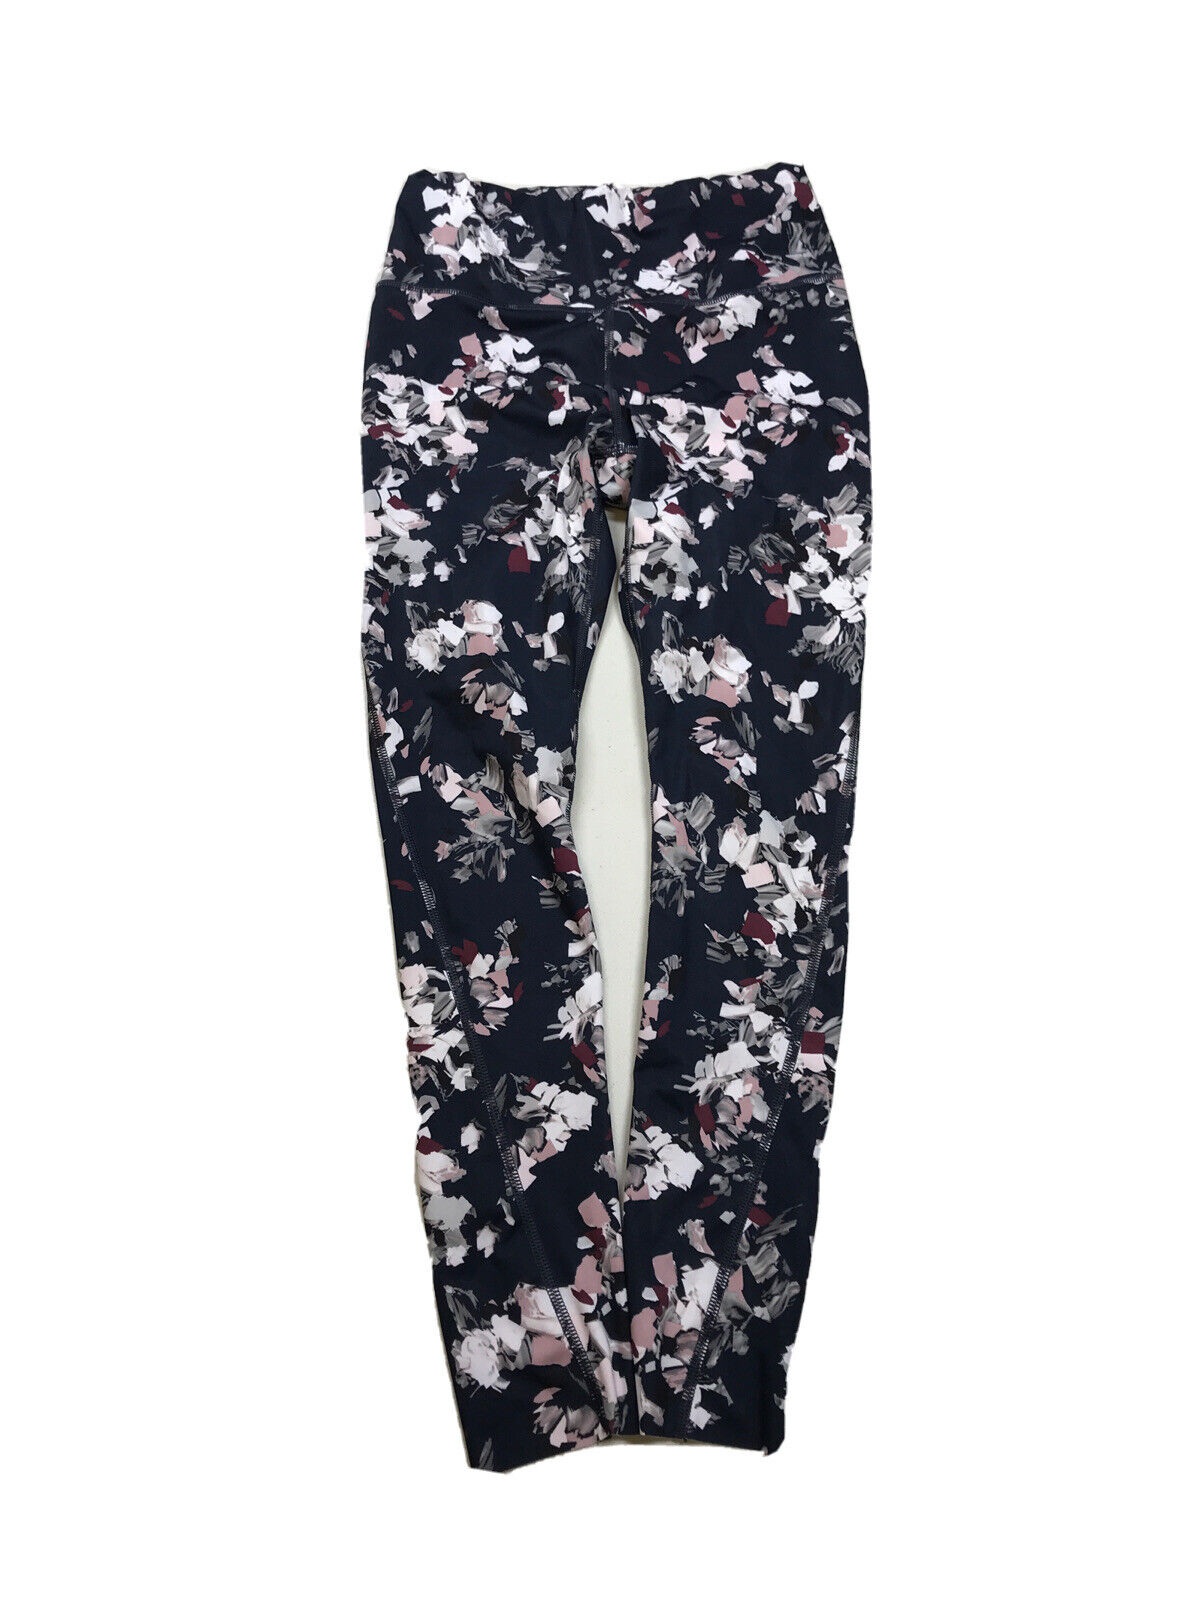 Athleta Women's Blue Floral Midnight Madness Leggings - XS – The Resell Club